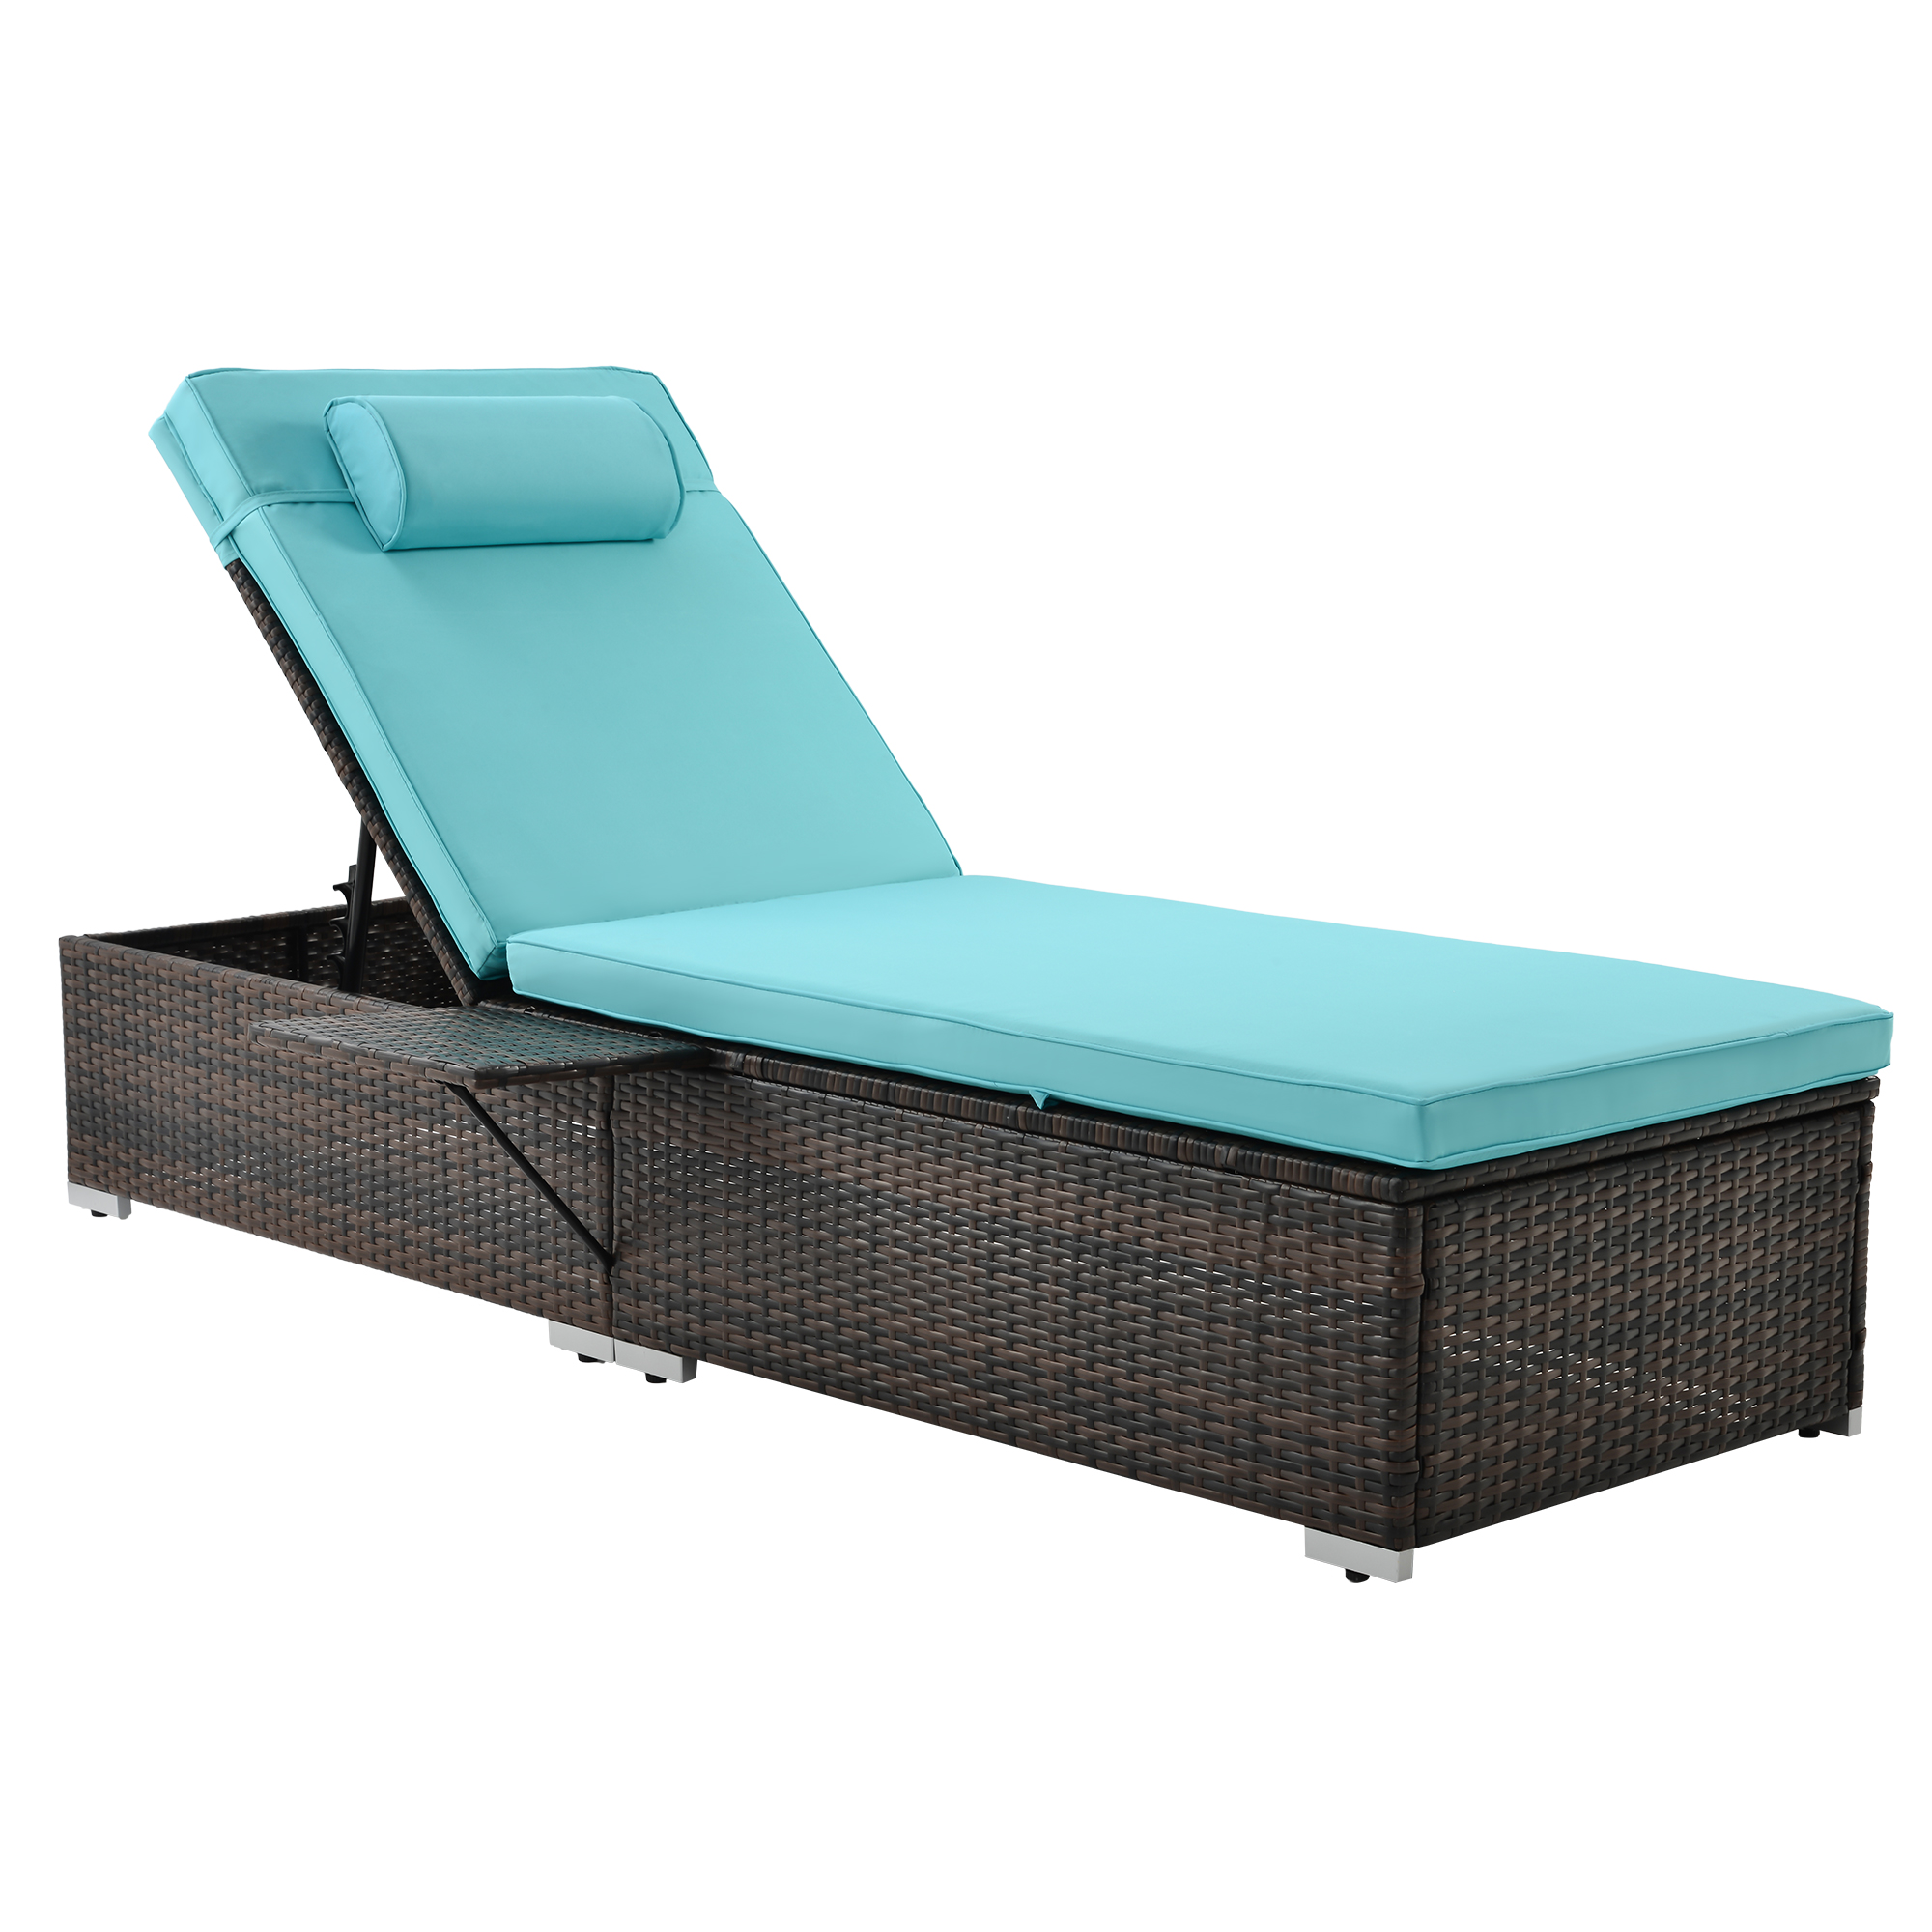 Sportaza SAME AS W213S00075: Outdoor PE Lounge - 2 Piece Patio Brown Rattan Reclining Chair Furniture Set Beach Pool Adjustable Backrest Recliners with Side Table and Comfort Head Pillow - image 5 of 7